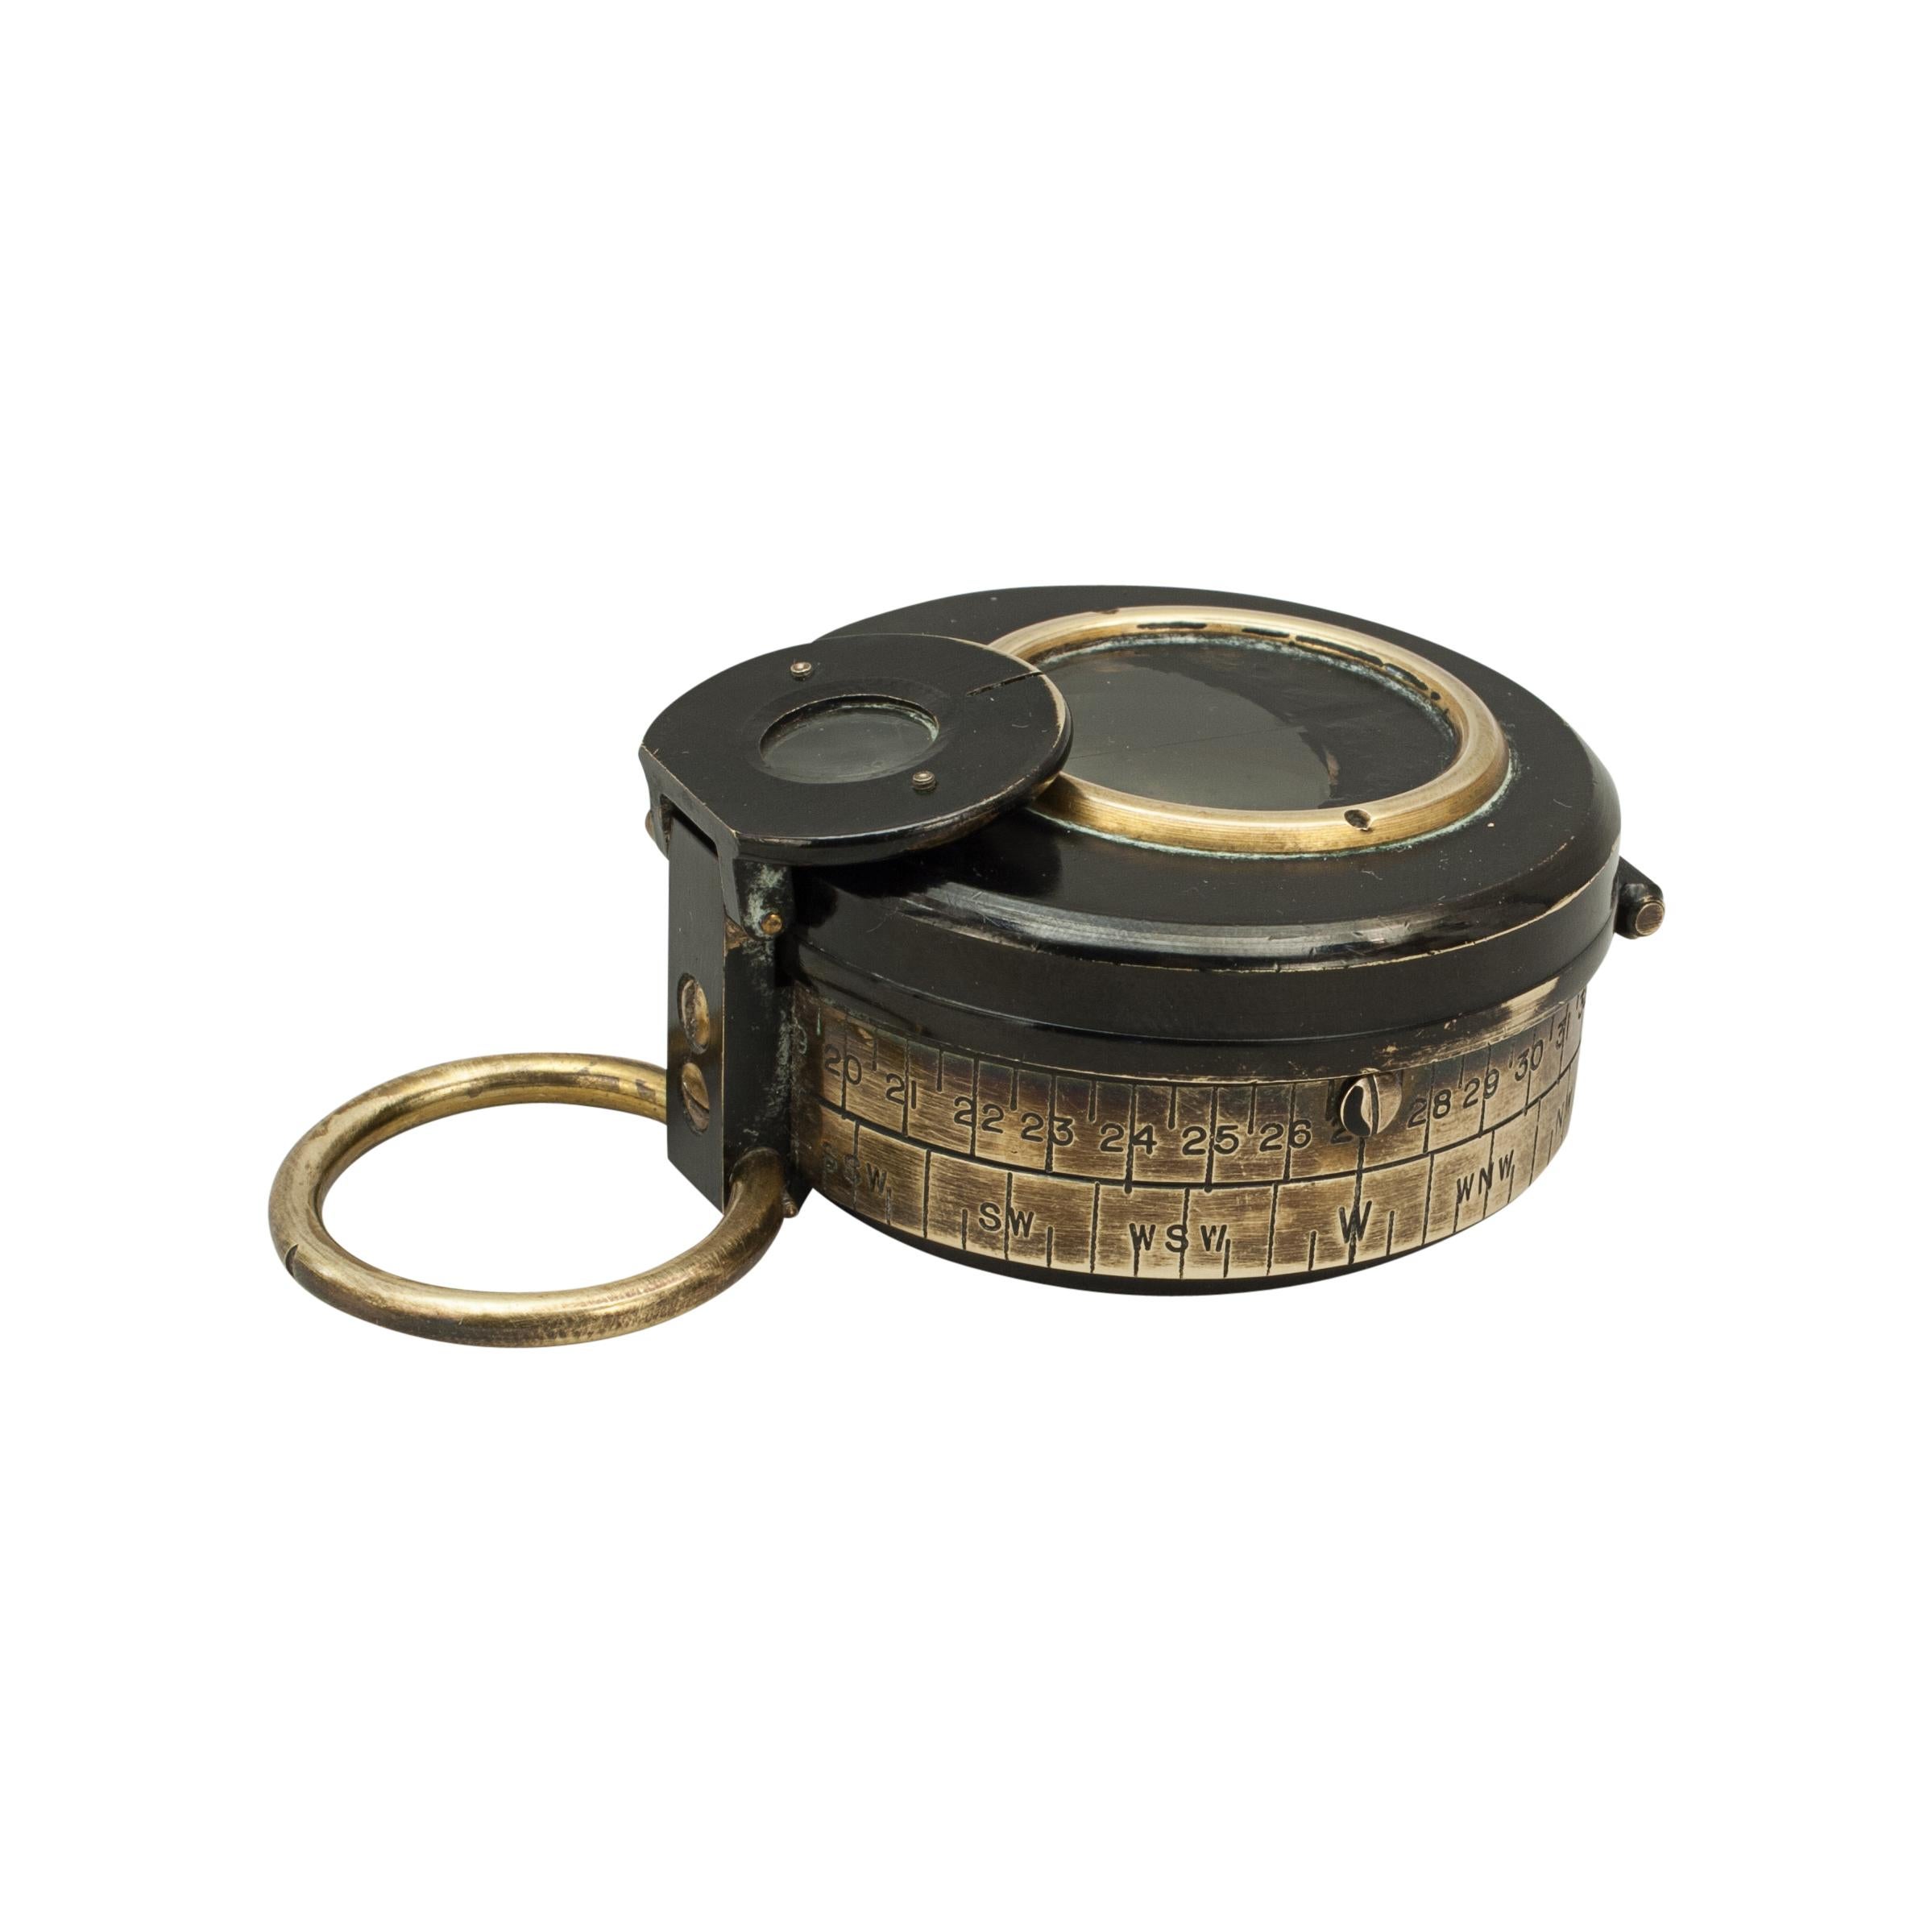 F Barker & Son Lensatic Compass.
A great little F Barker & Son marching compass dating from around the World War I era. The compass is with its original finish with patent details on the back, 'Barkers patents 1818/15 103019/16 11002/16'. Barker